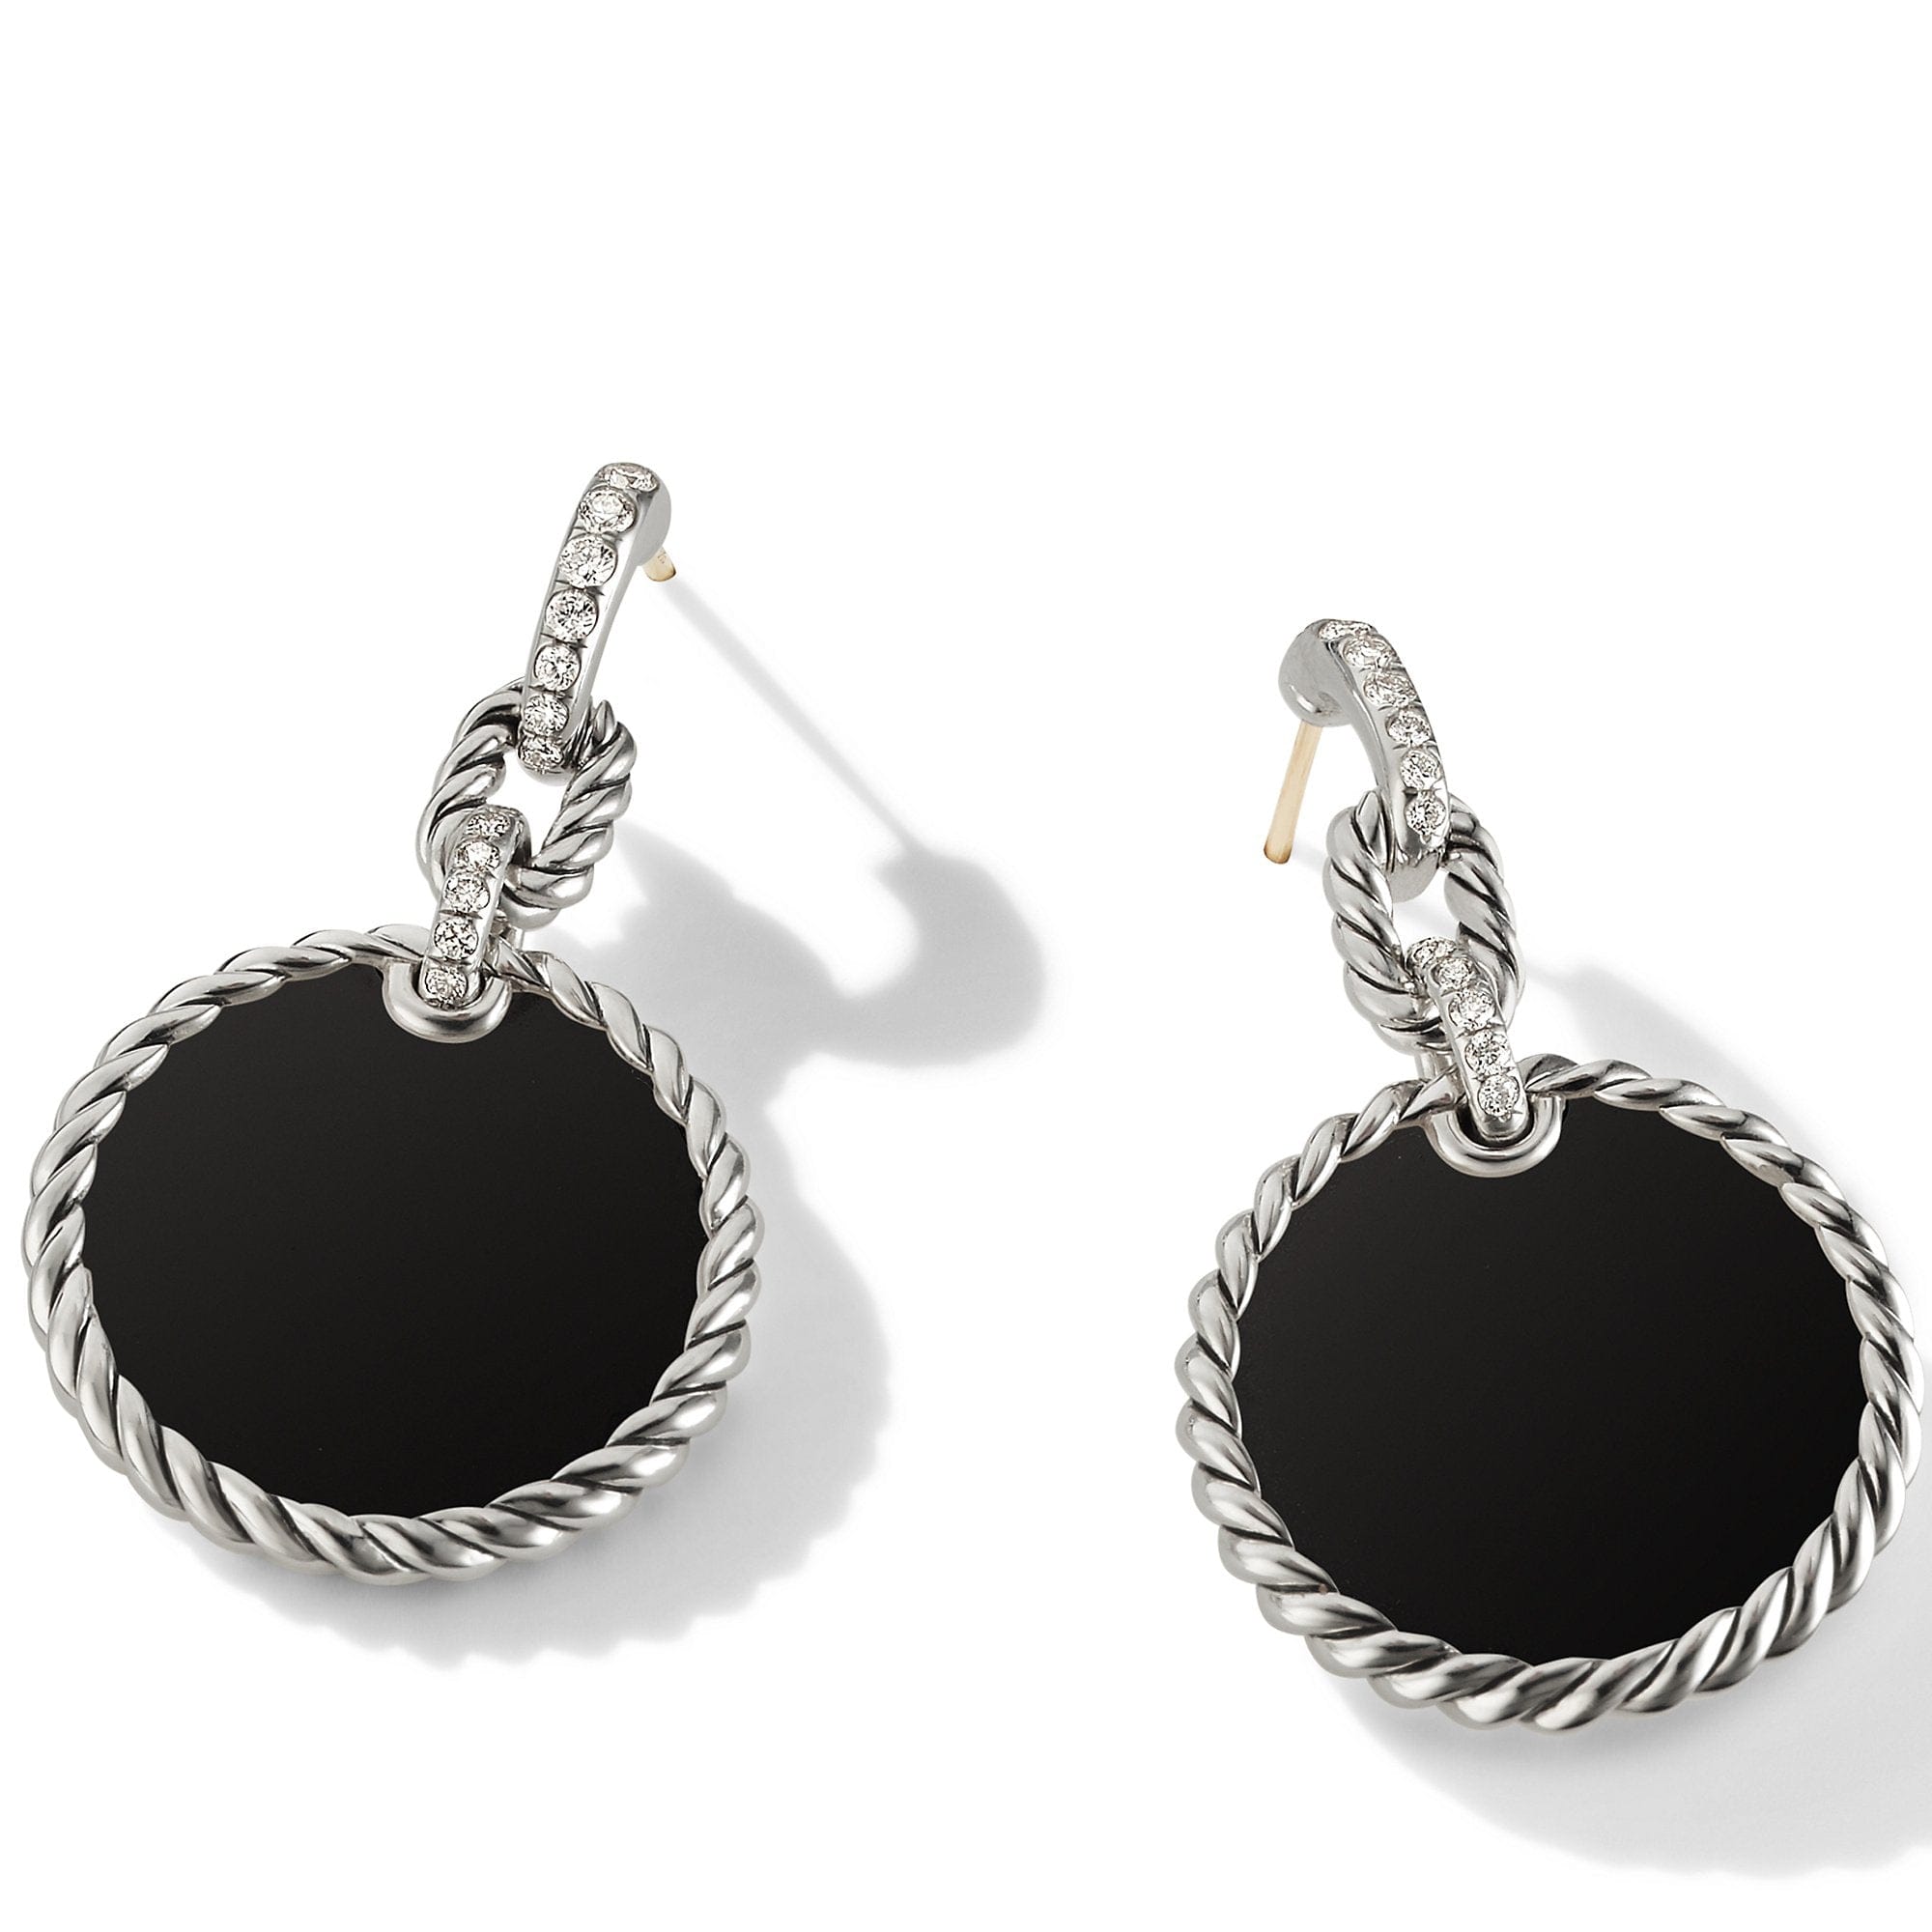 DY Elements® Convertible Drop Earrings with Black Onyx and Pavé Diamonds